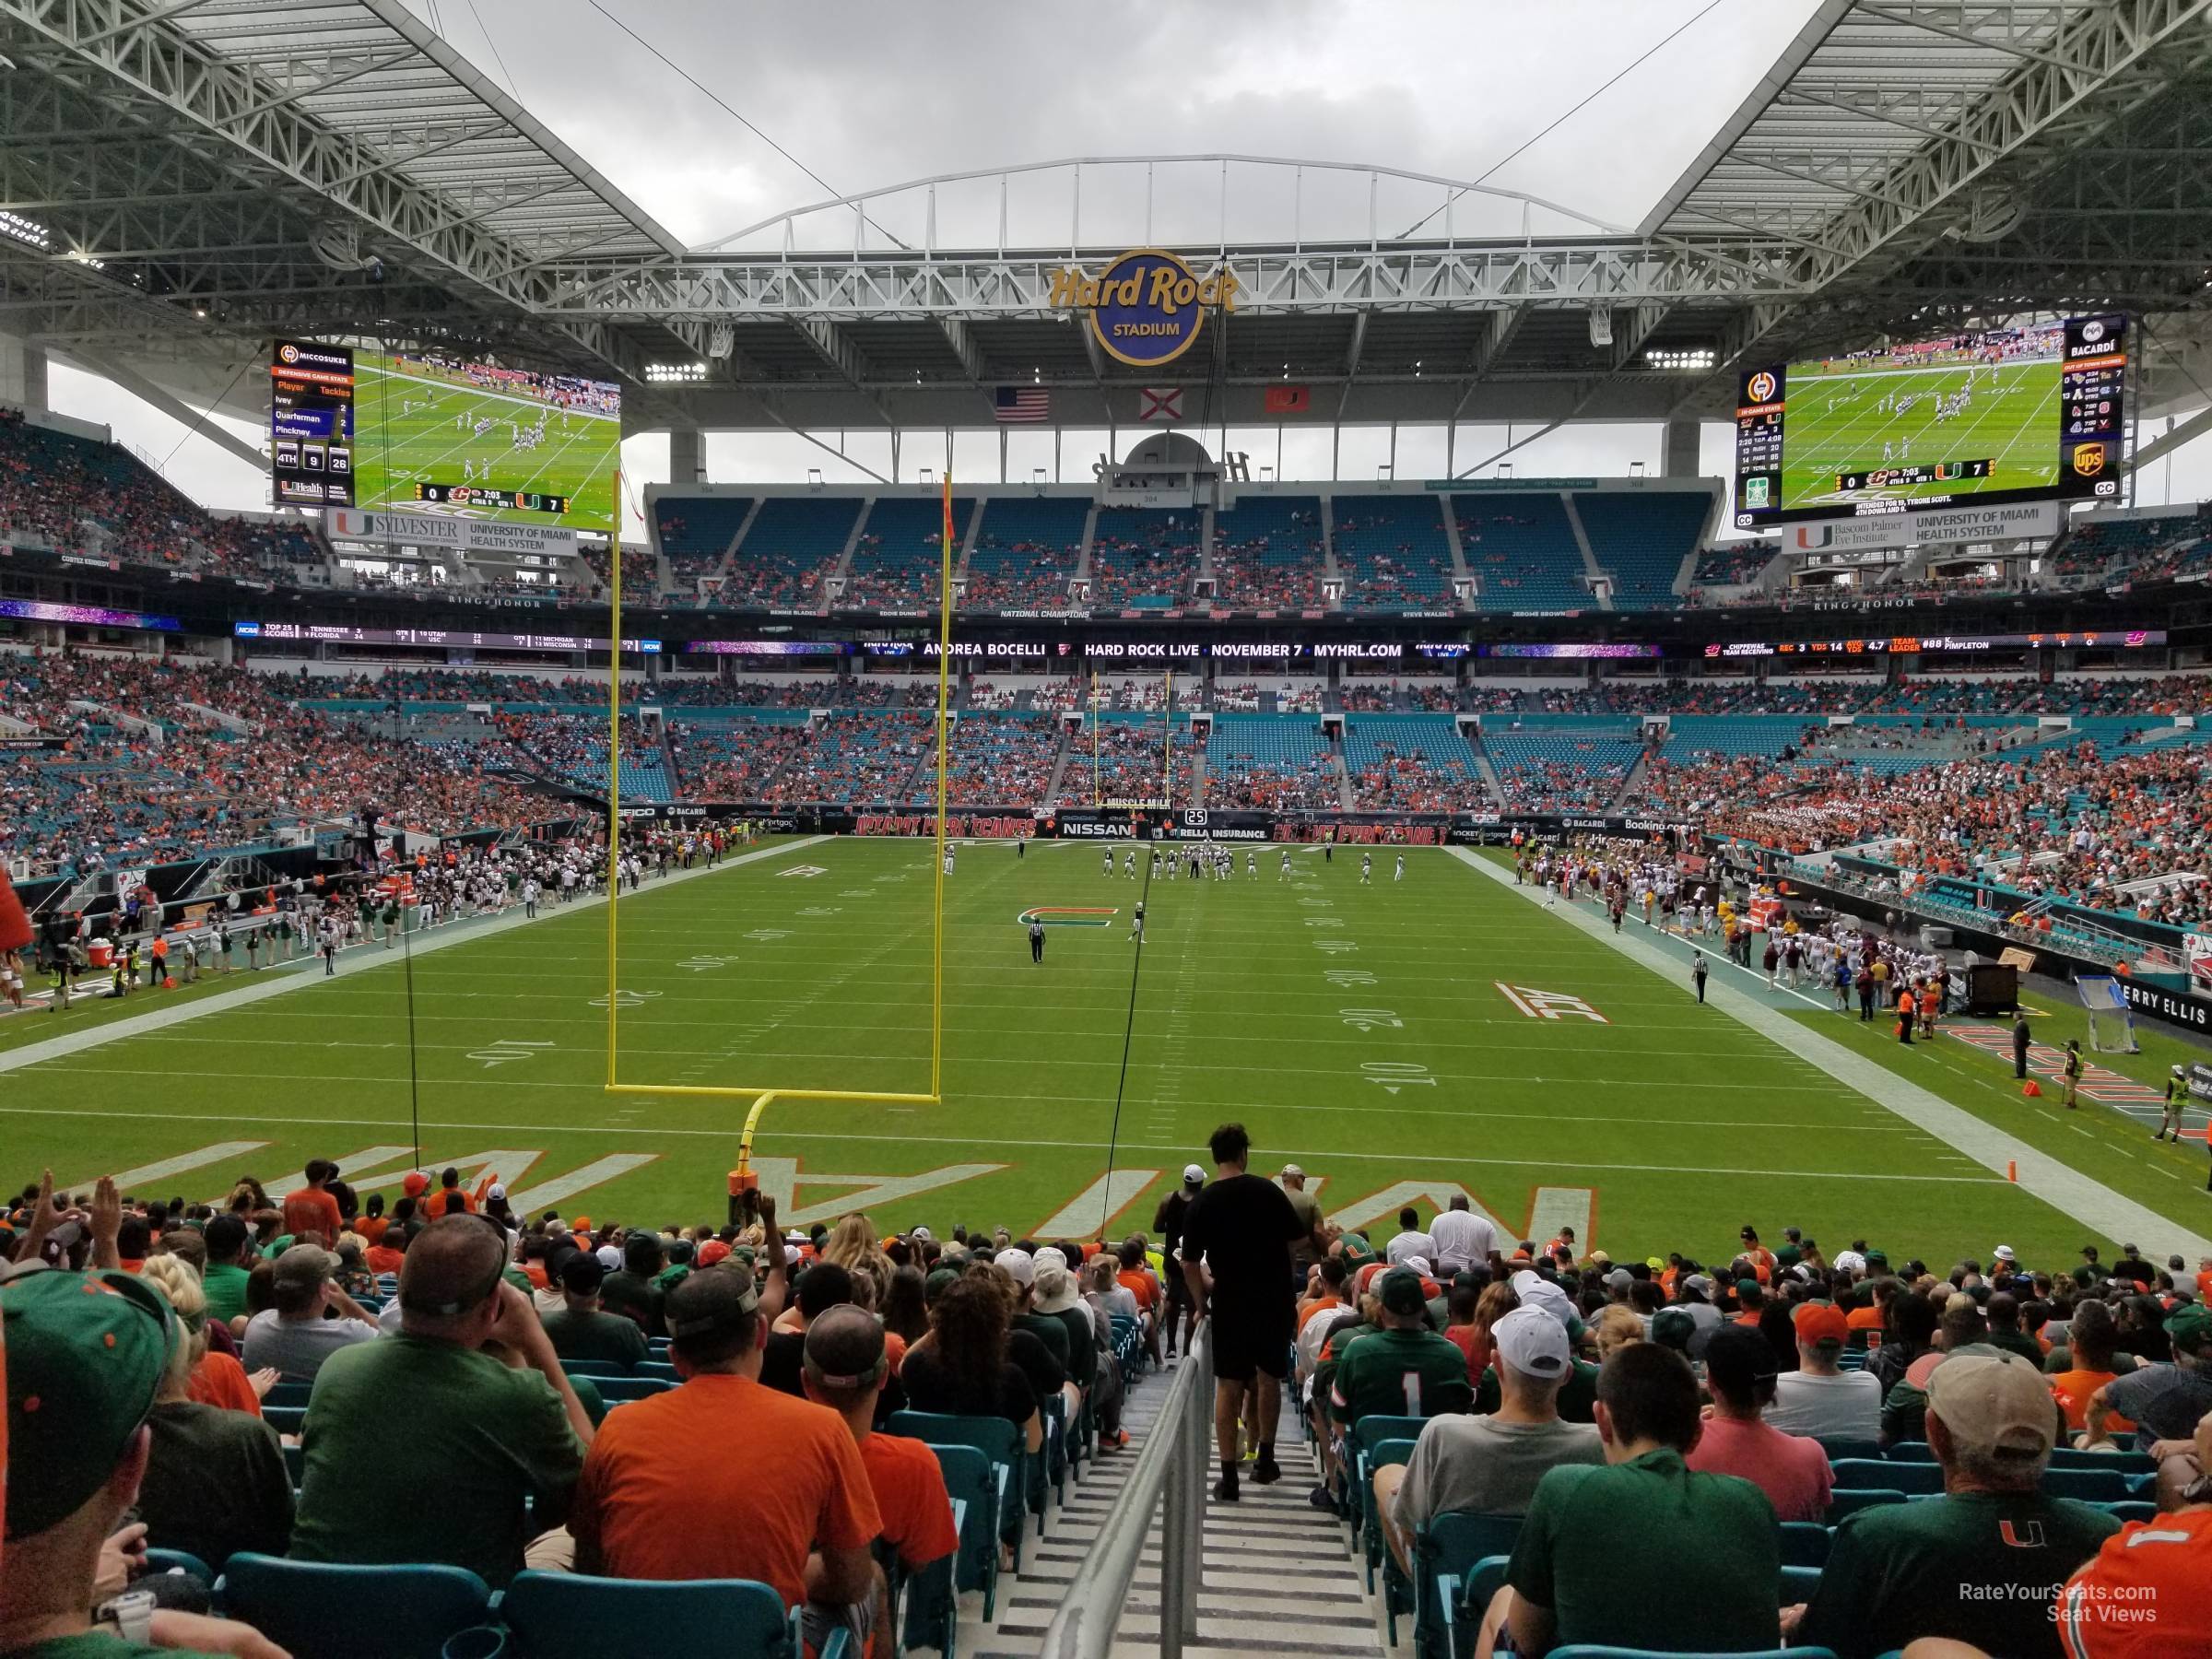 section 131, row 28 seat view  for football - hard rock stadium